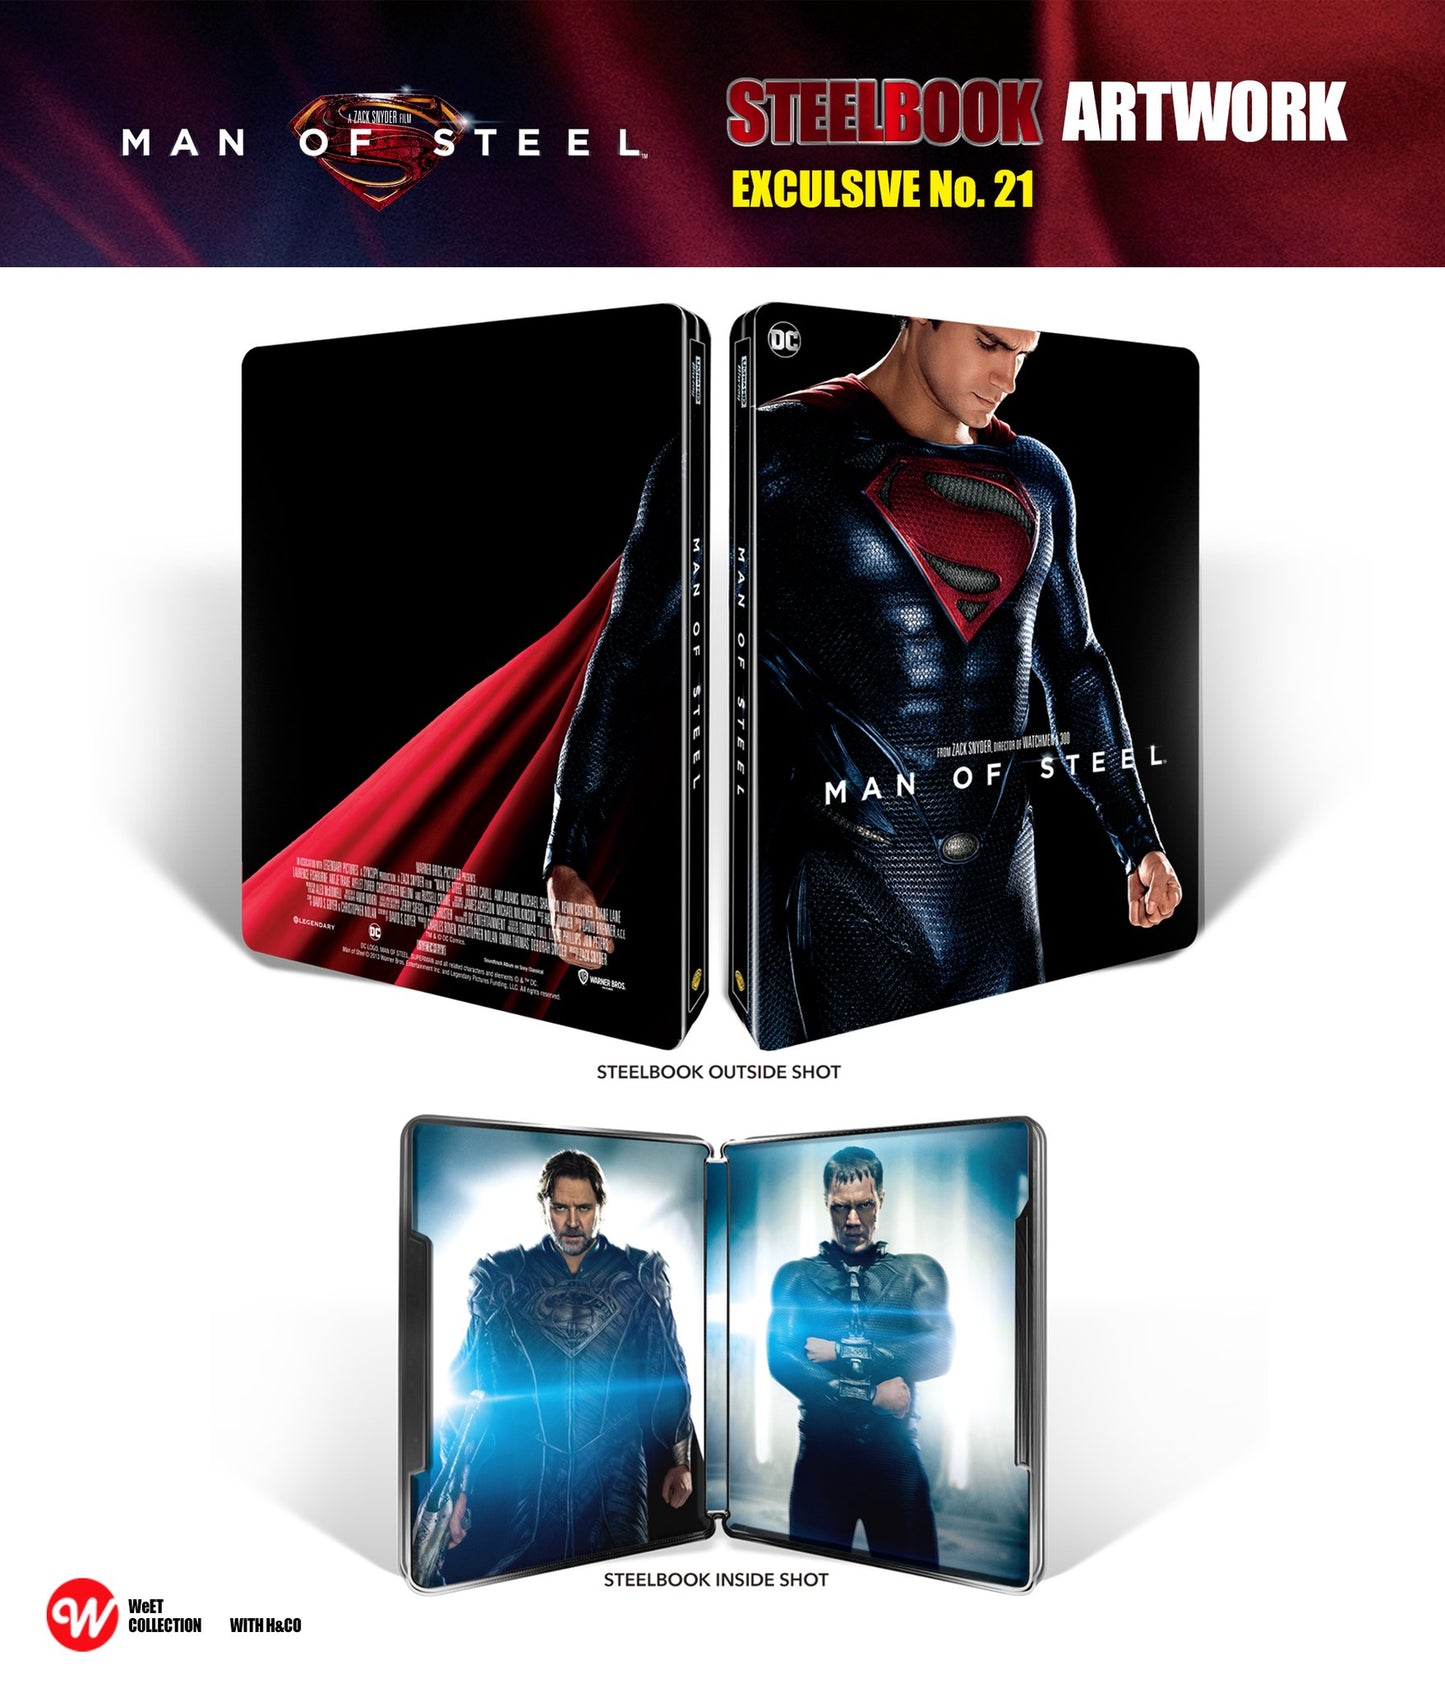 Man Of Steel 4K Blu-ray Steelbook WeET Collection Exclusive #21 HDN GB Pre-Order One Click Box Set